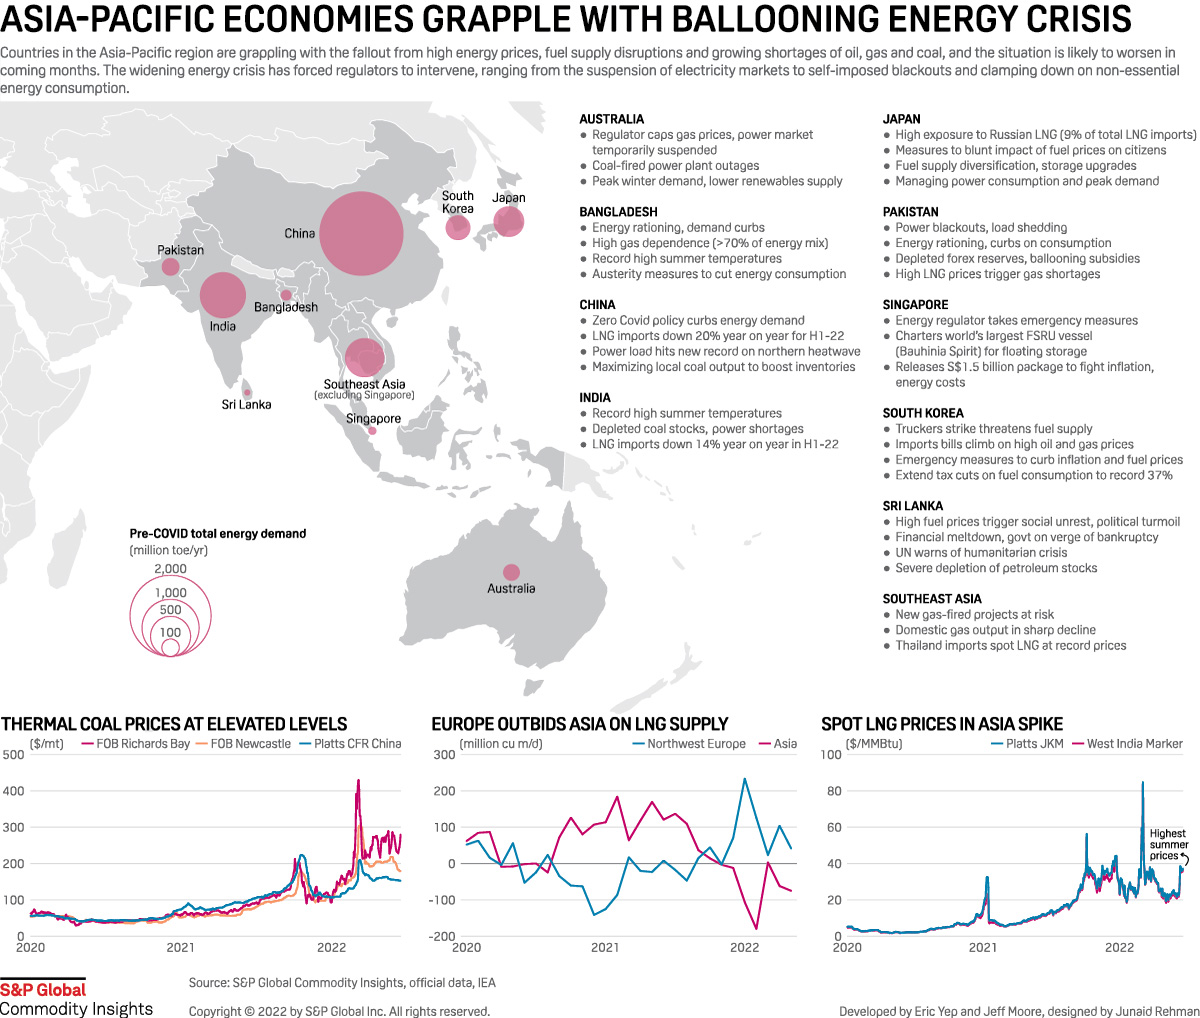 Asia-Pacific economies grapple with ballooning energy crisis